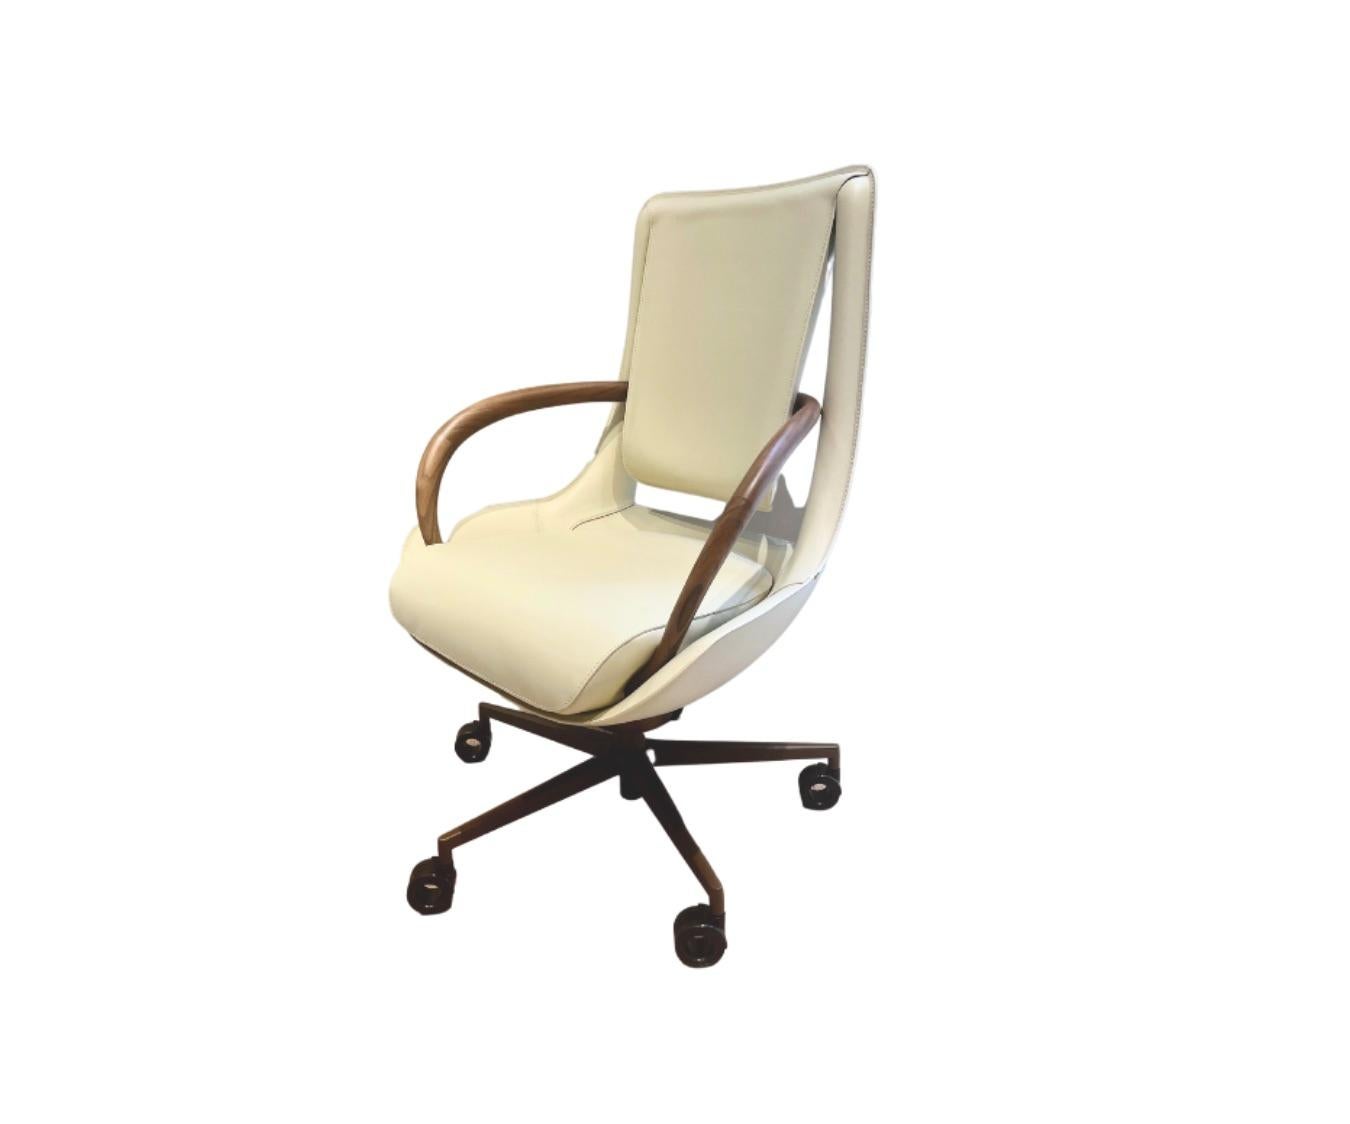 Designed by M2ATELIER

Clip executive office armchair in Ivory Saddle Leather with back structure in profiled steel, seat in Polimex (composite polyester/polyurethane material), and armrest in solid walnut Canaletto wood.
The castors, the base, and